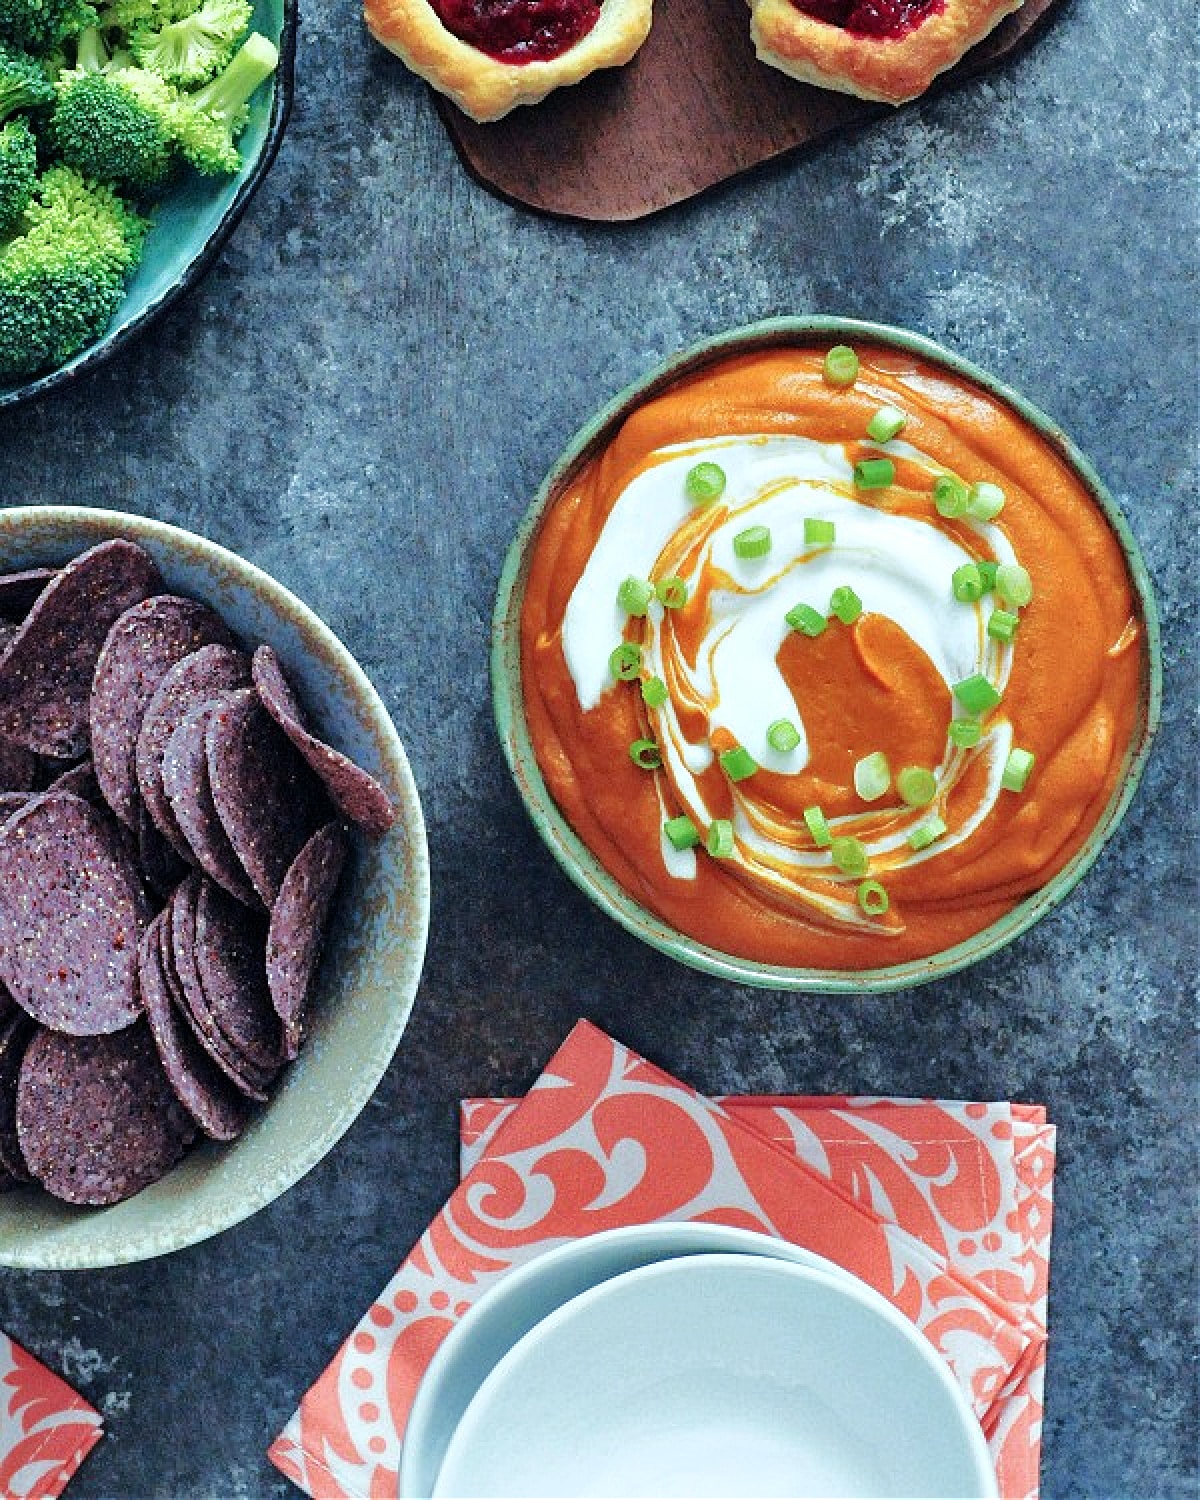 Overhead view of deep orange enchilada dip with bright white sour cream swirled on top, garnished with chopped green onion. Dip is in a grey bowl with broccoli trees and blue corn chips on the side for dipping.